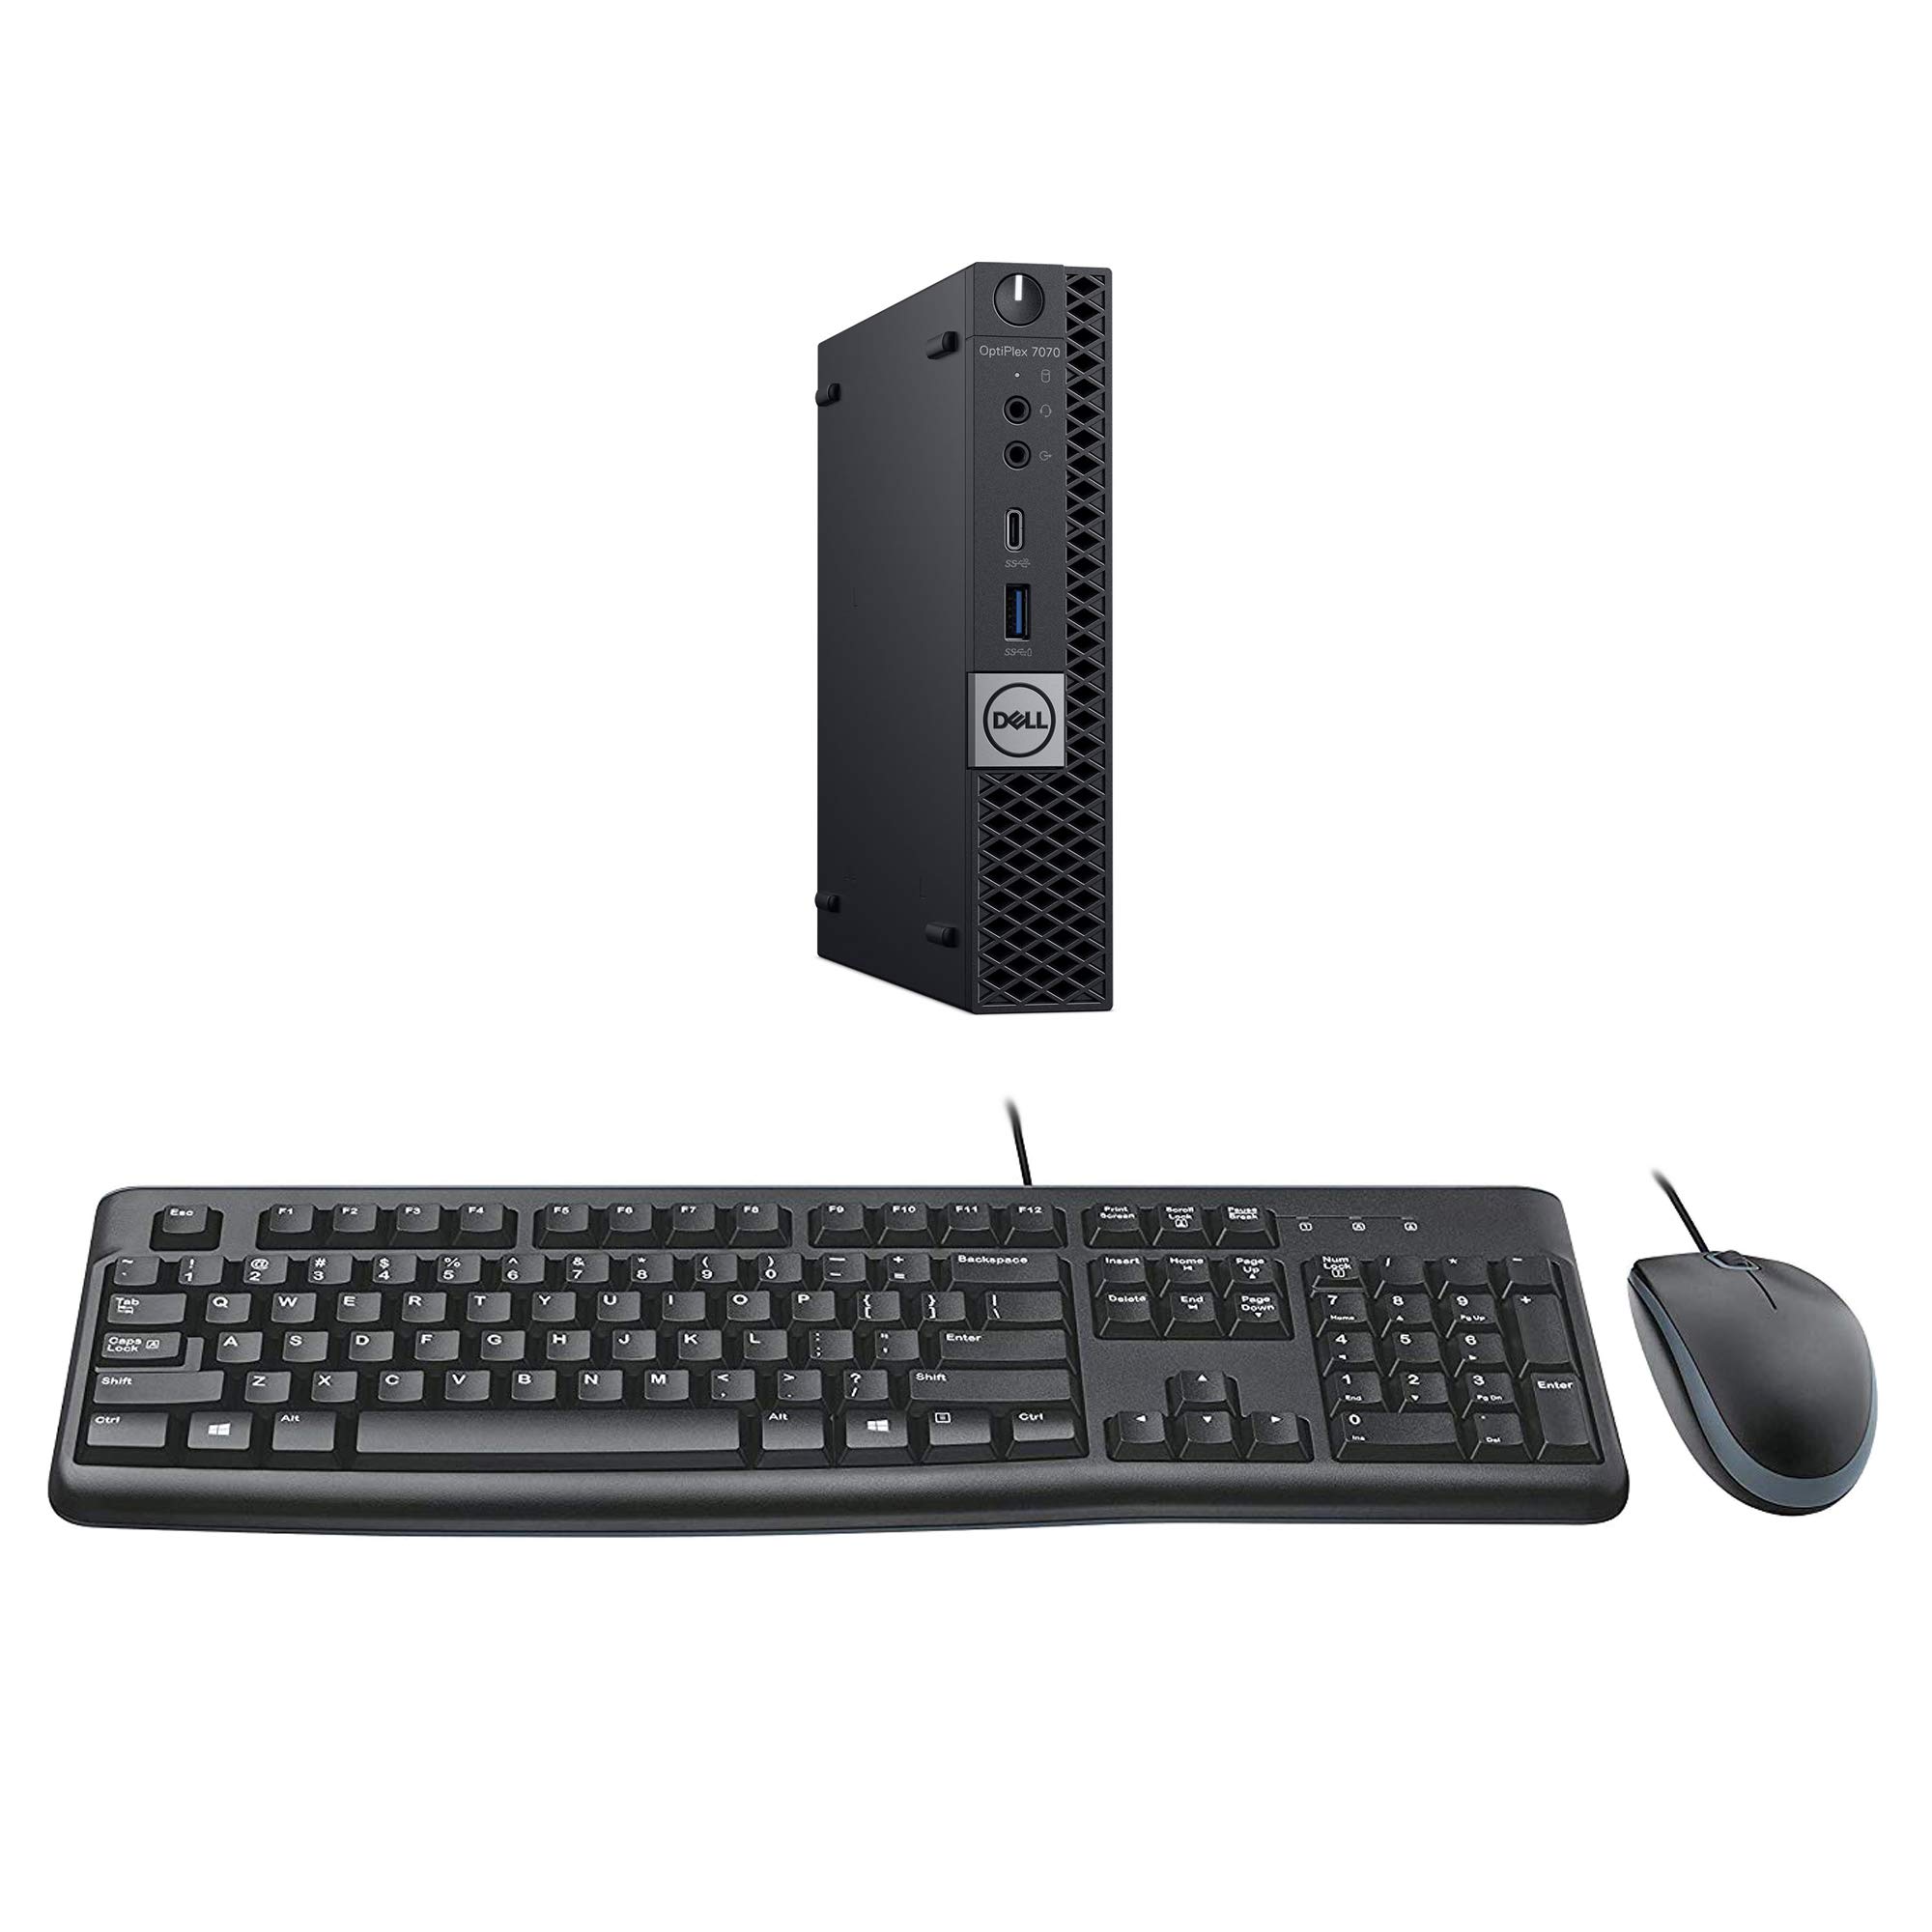 Dell Optiplex 7070 Micro Form Factor PC with Intel Core i7-9700T, 32GB DDR4, 1TB NVMe SSD, Keyboard and Mouse, Windows 10 Pro (Renewed)